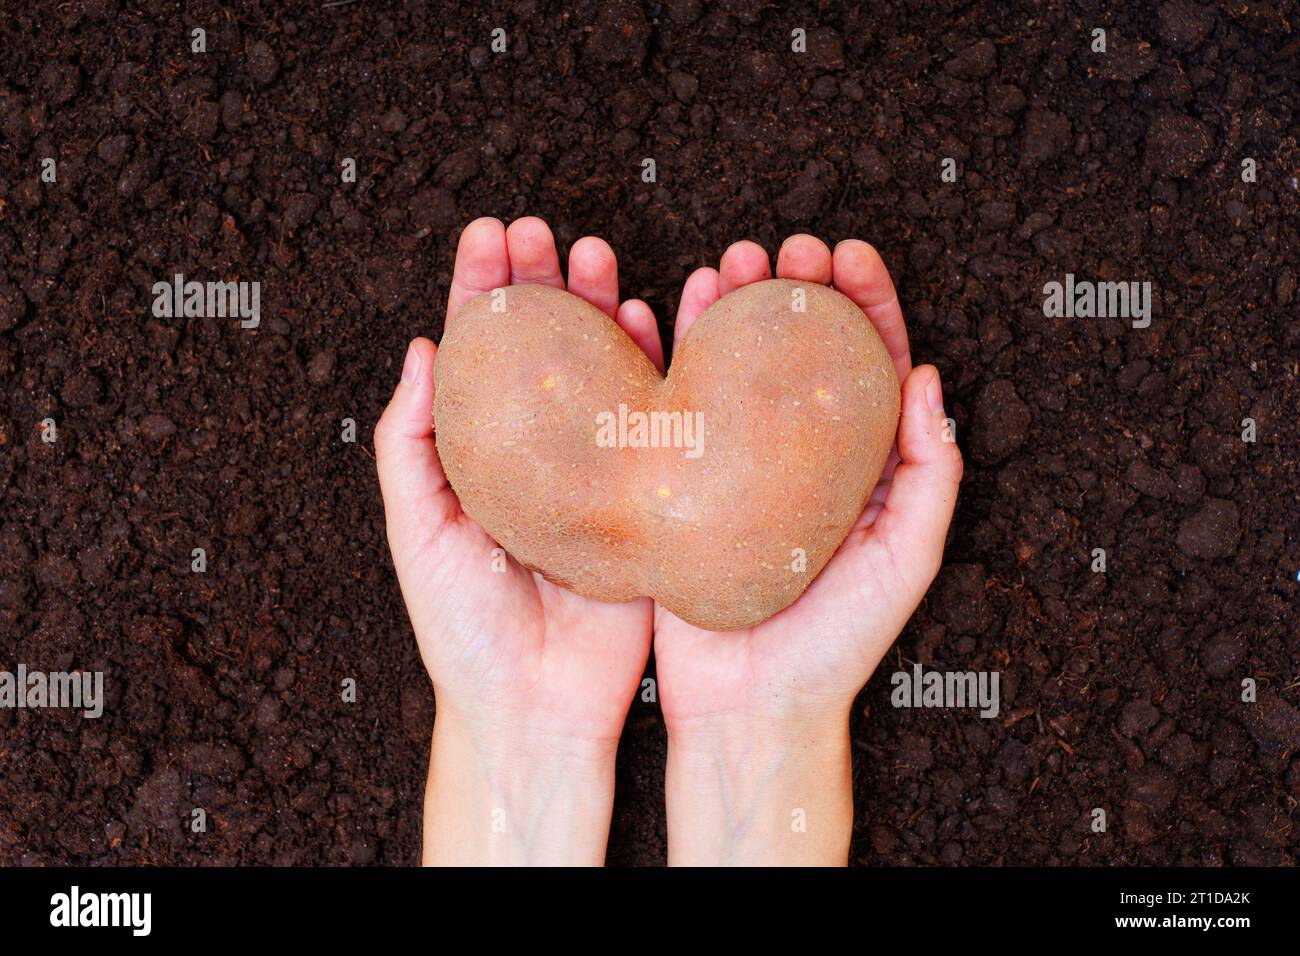 Top-view of a large heart-shaped potato cradled in hands against a tilled soil background. Wholesome natural produce related concept. Stock Photo